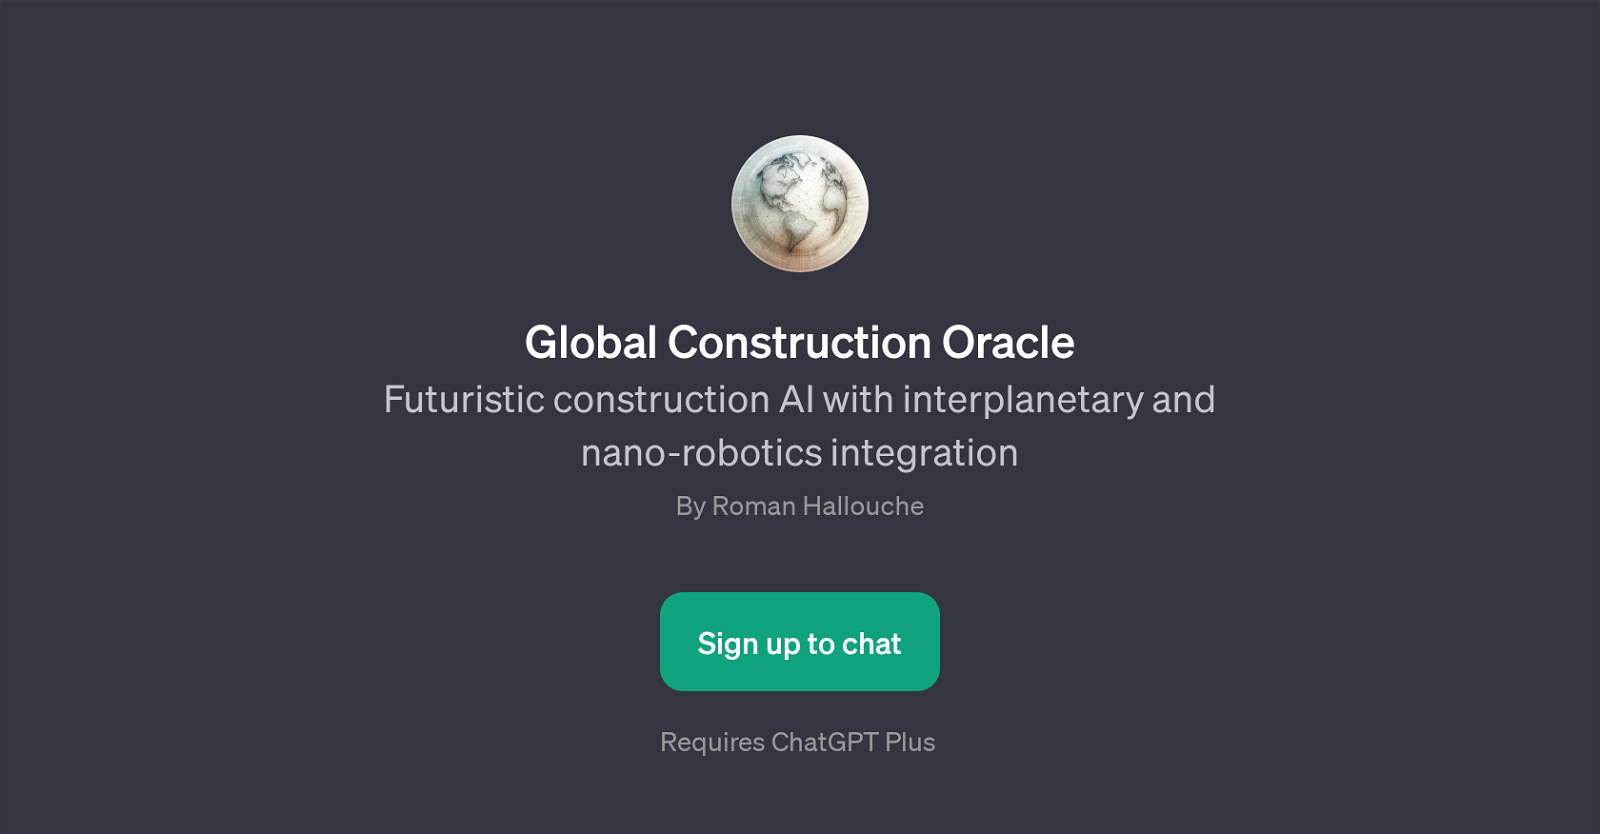 Global Construction Oracle website